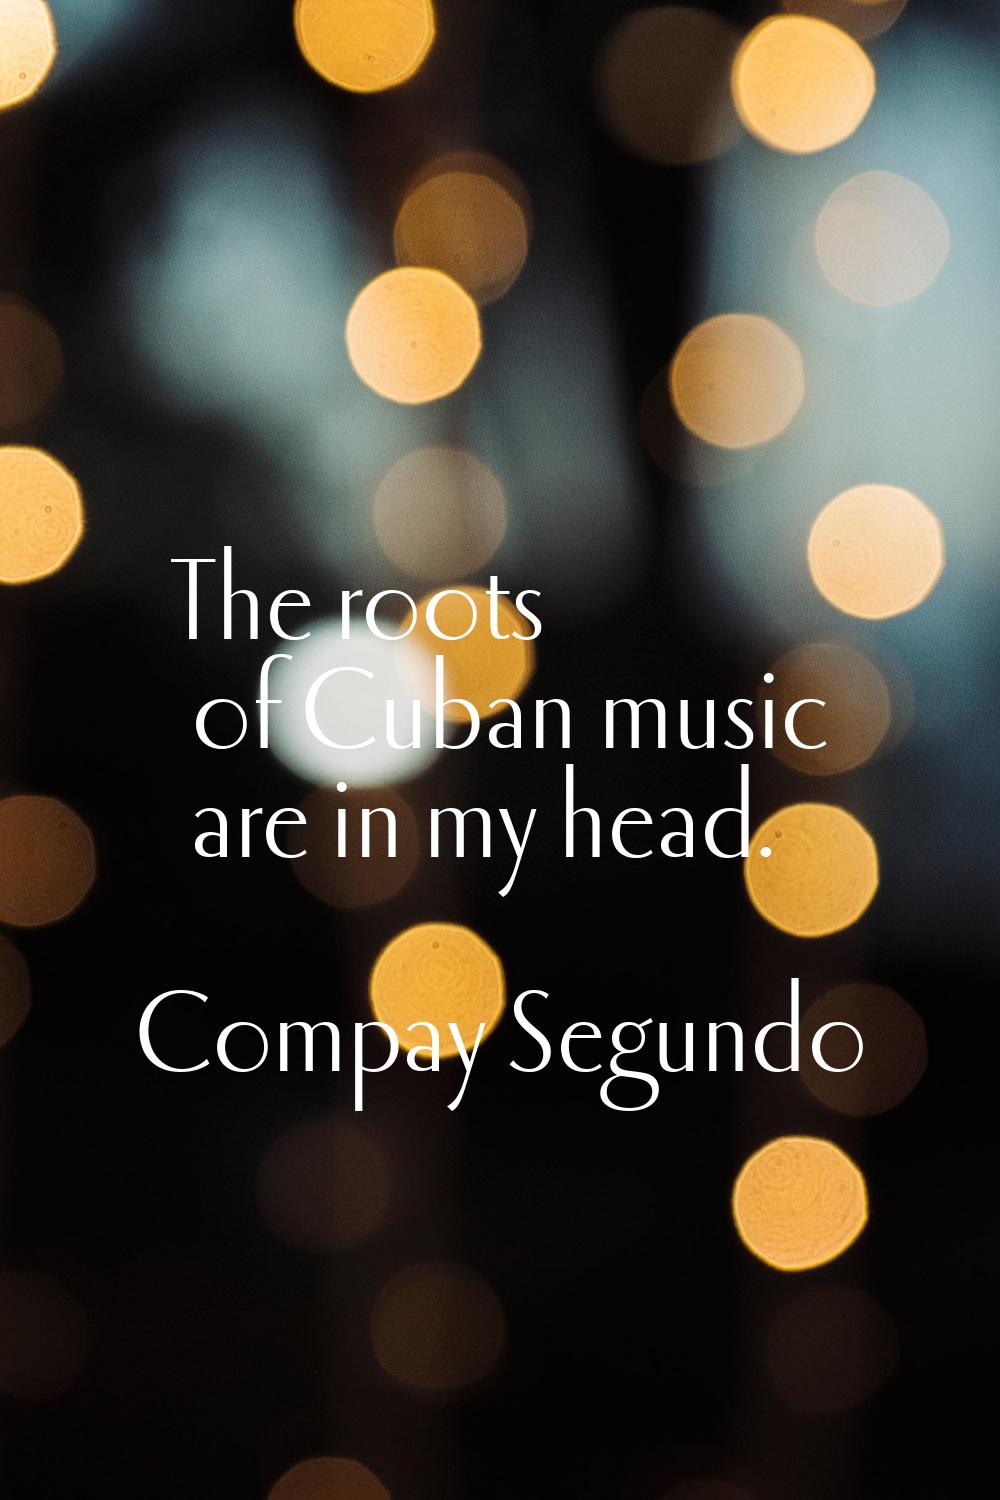 The roots of Cuban music are in my head.